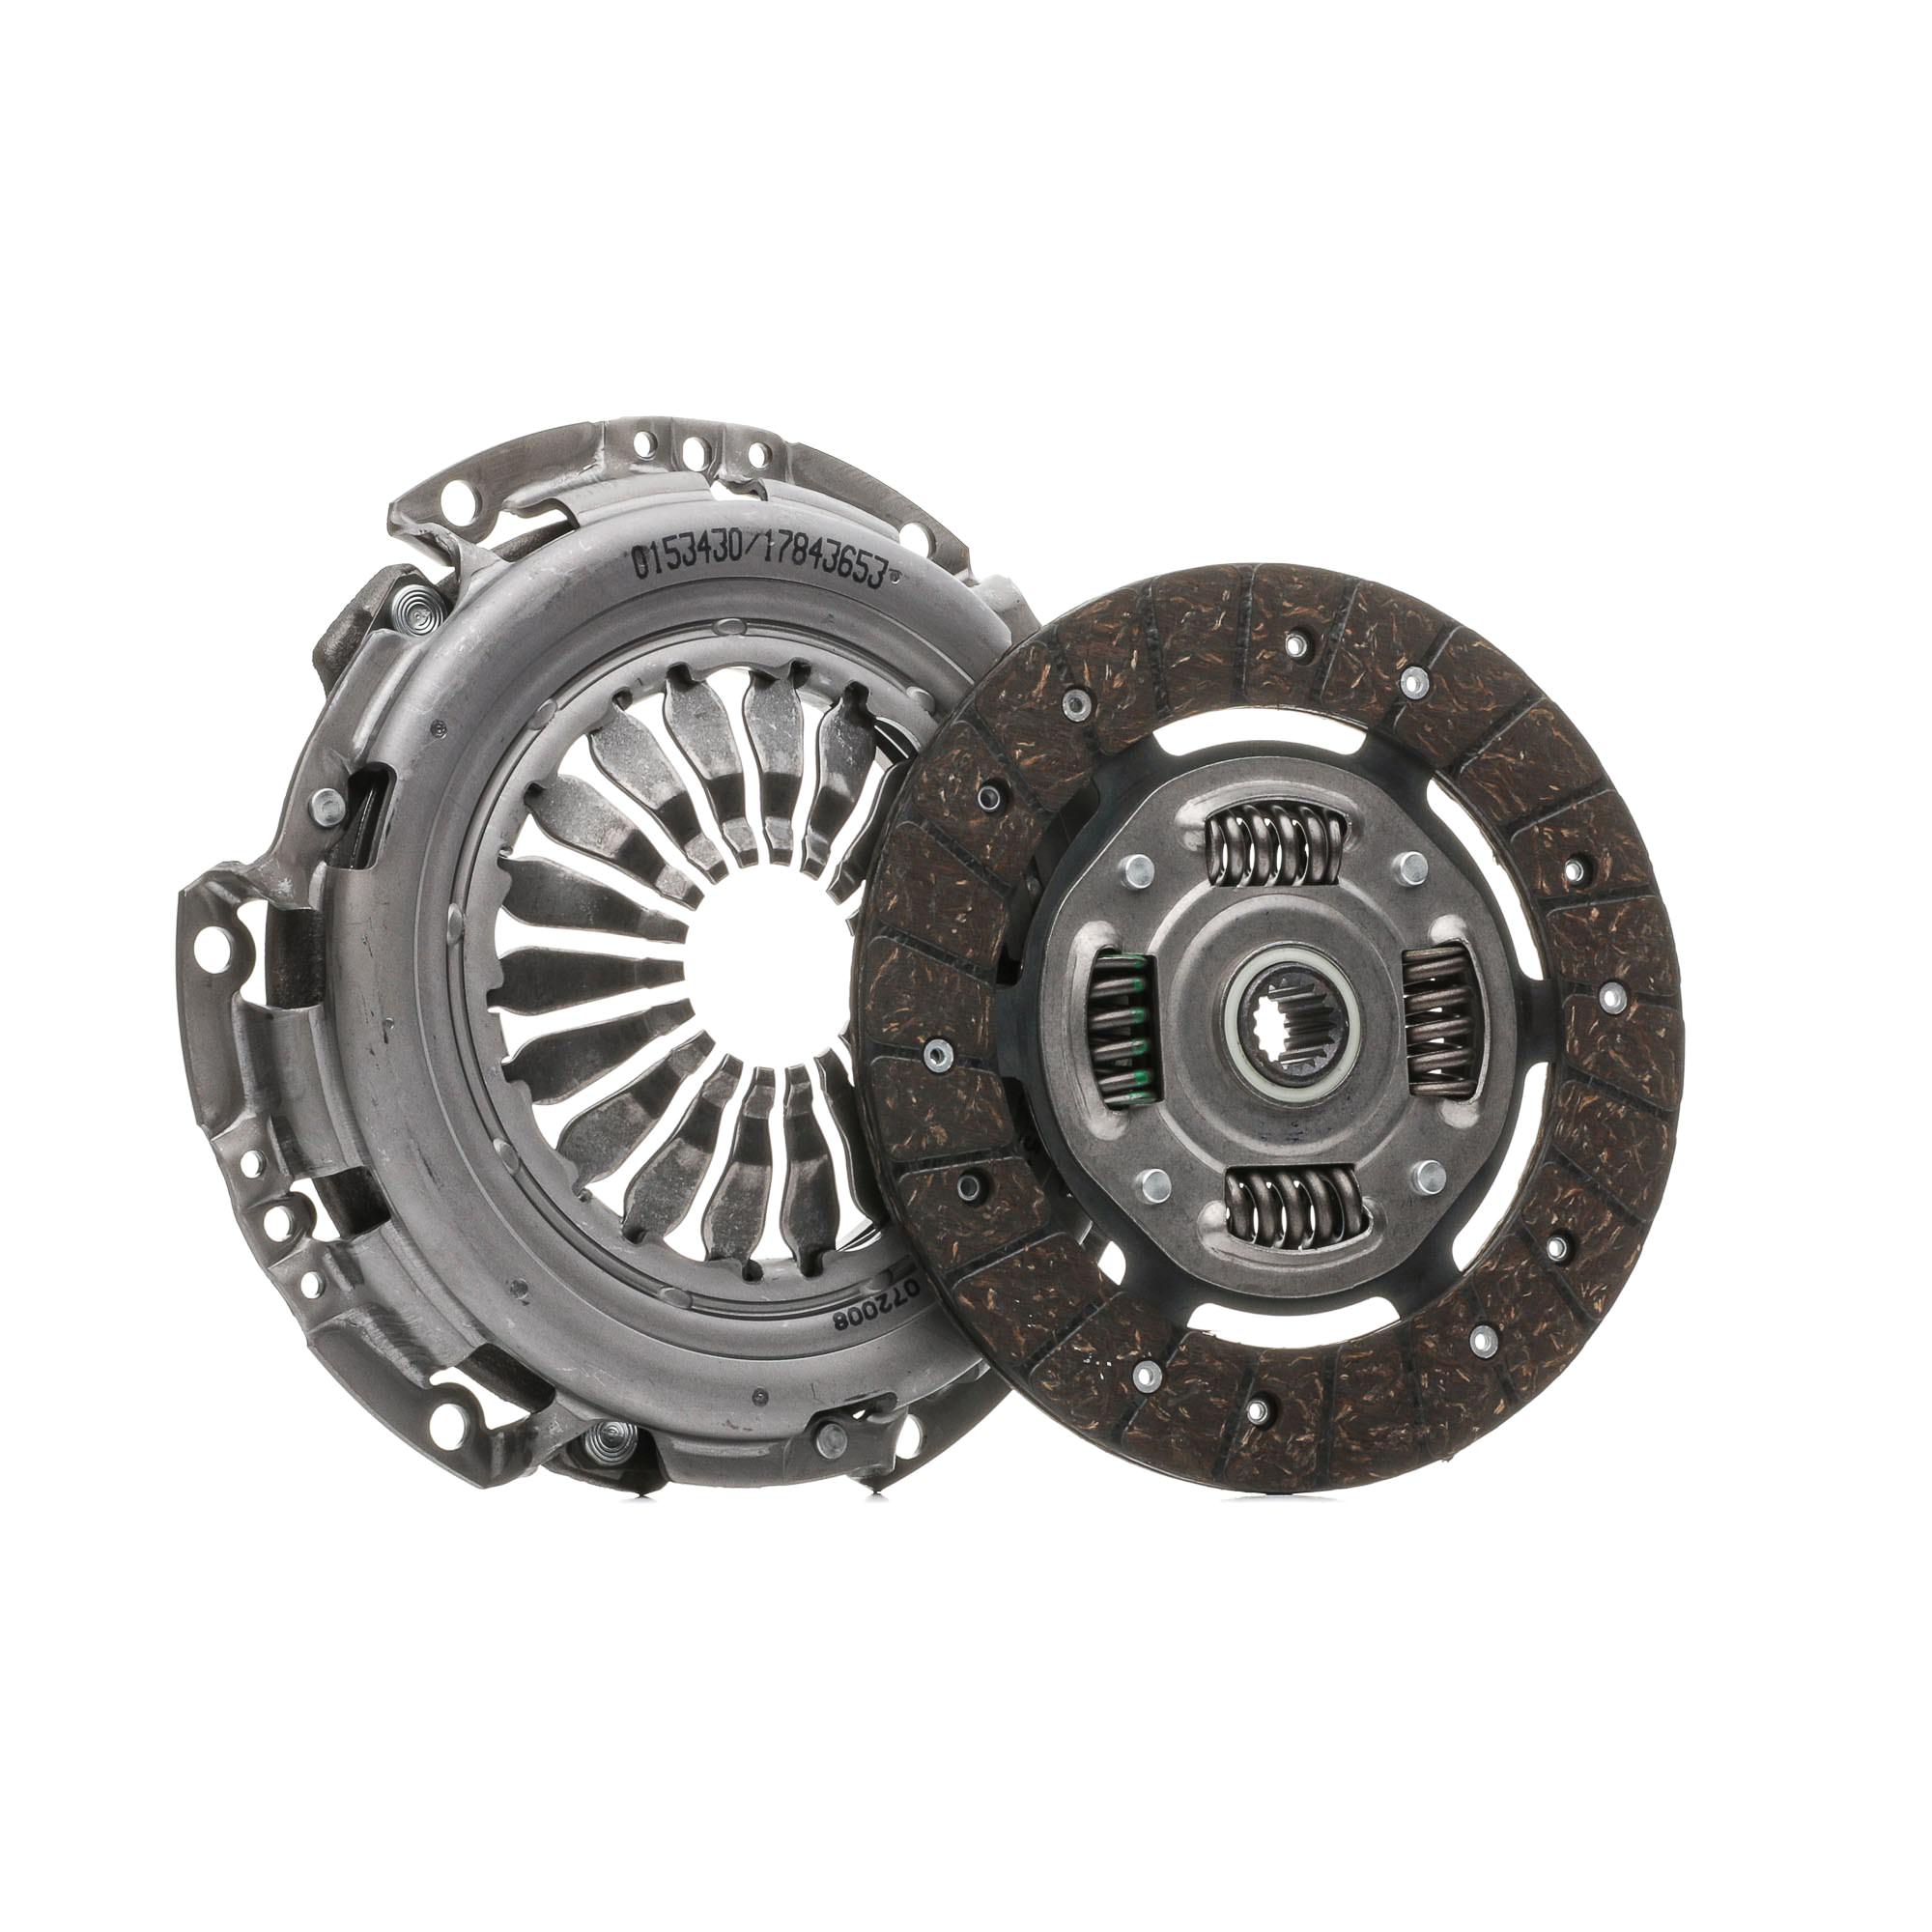 STARK SKCK-0102019 Clutch kit with clutch pressure plate, with clutch disc, without clutch release bearing, 200mm